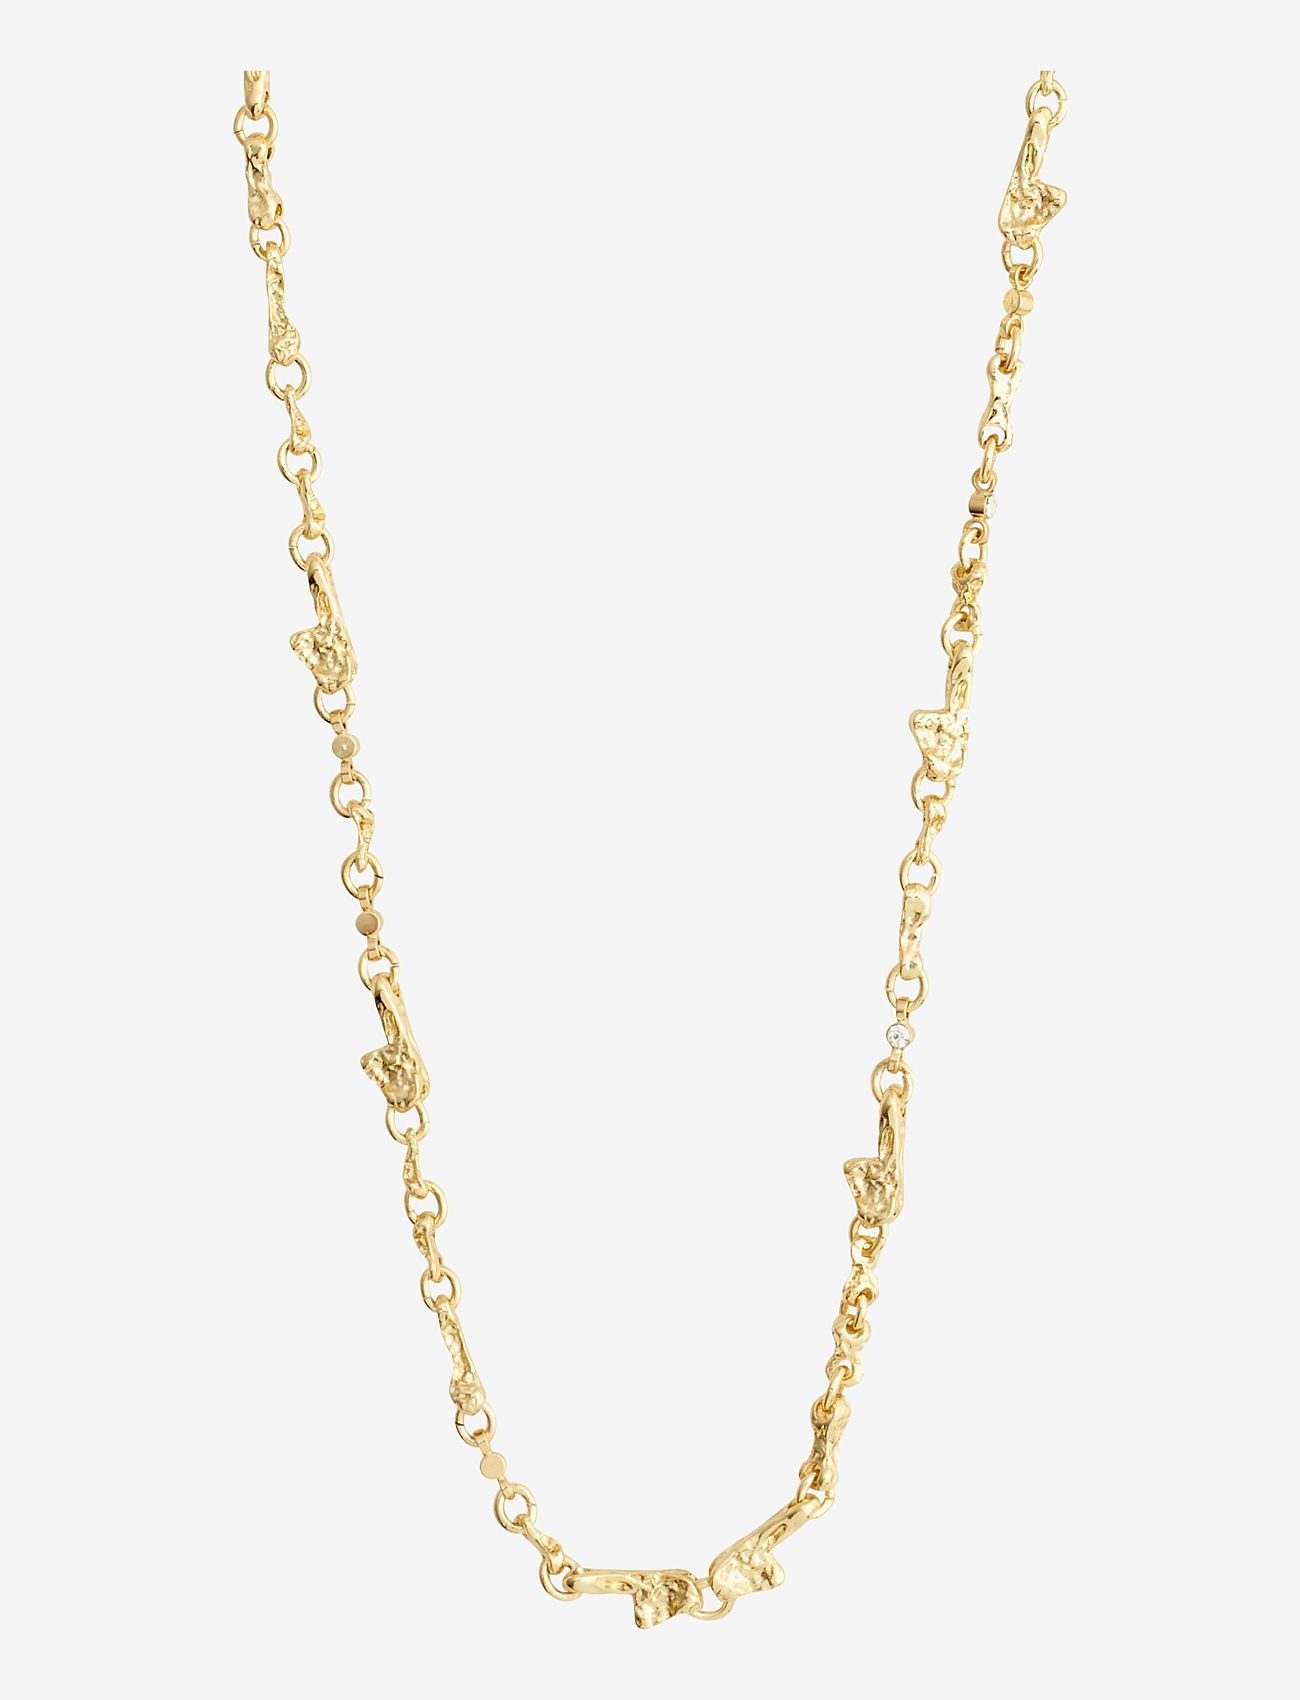 Pilgrim - HALLIE organic shaped crystal necklace gold-plated - chain necklaces - gold plated - 0